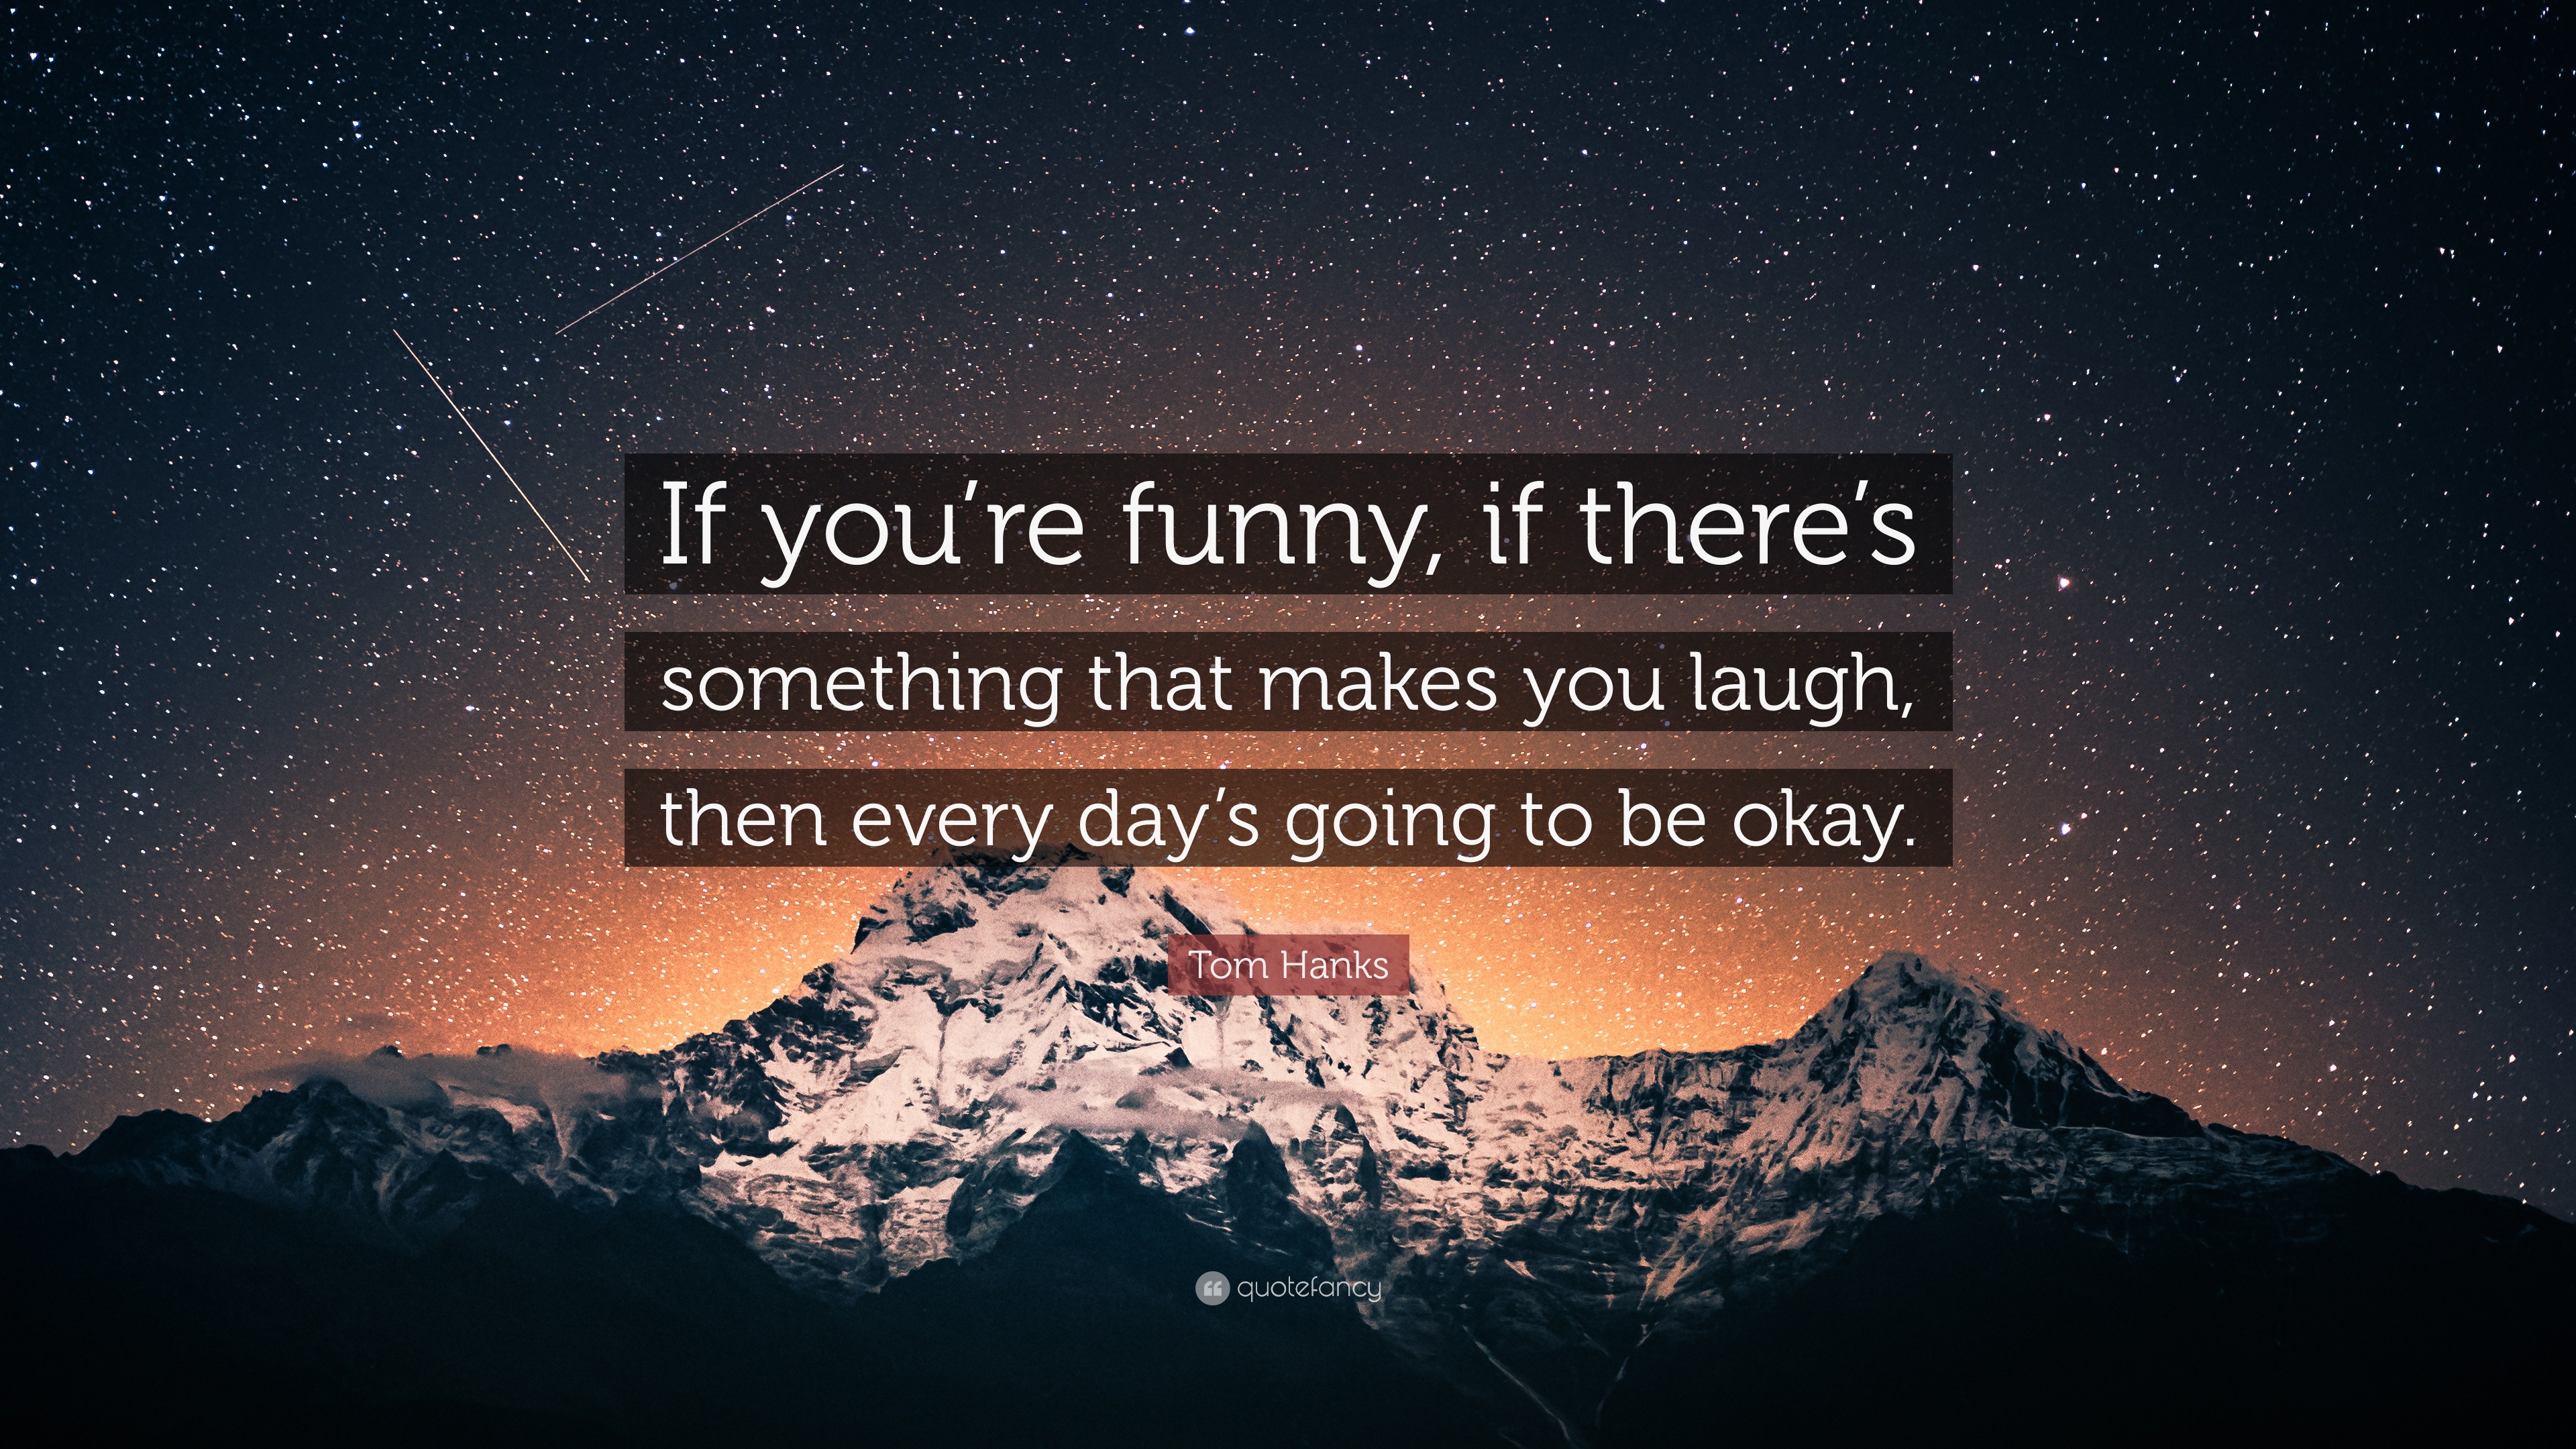 Tom Hanks Quote: “If you're funny, if there's something that makes you  laugh, then every